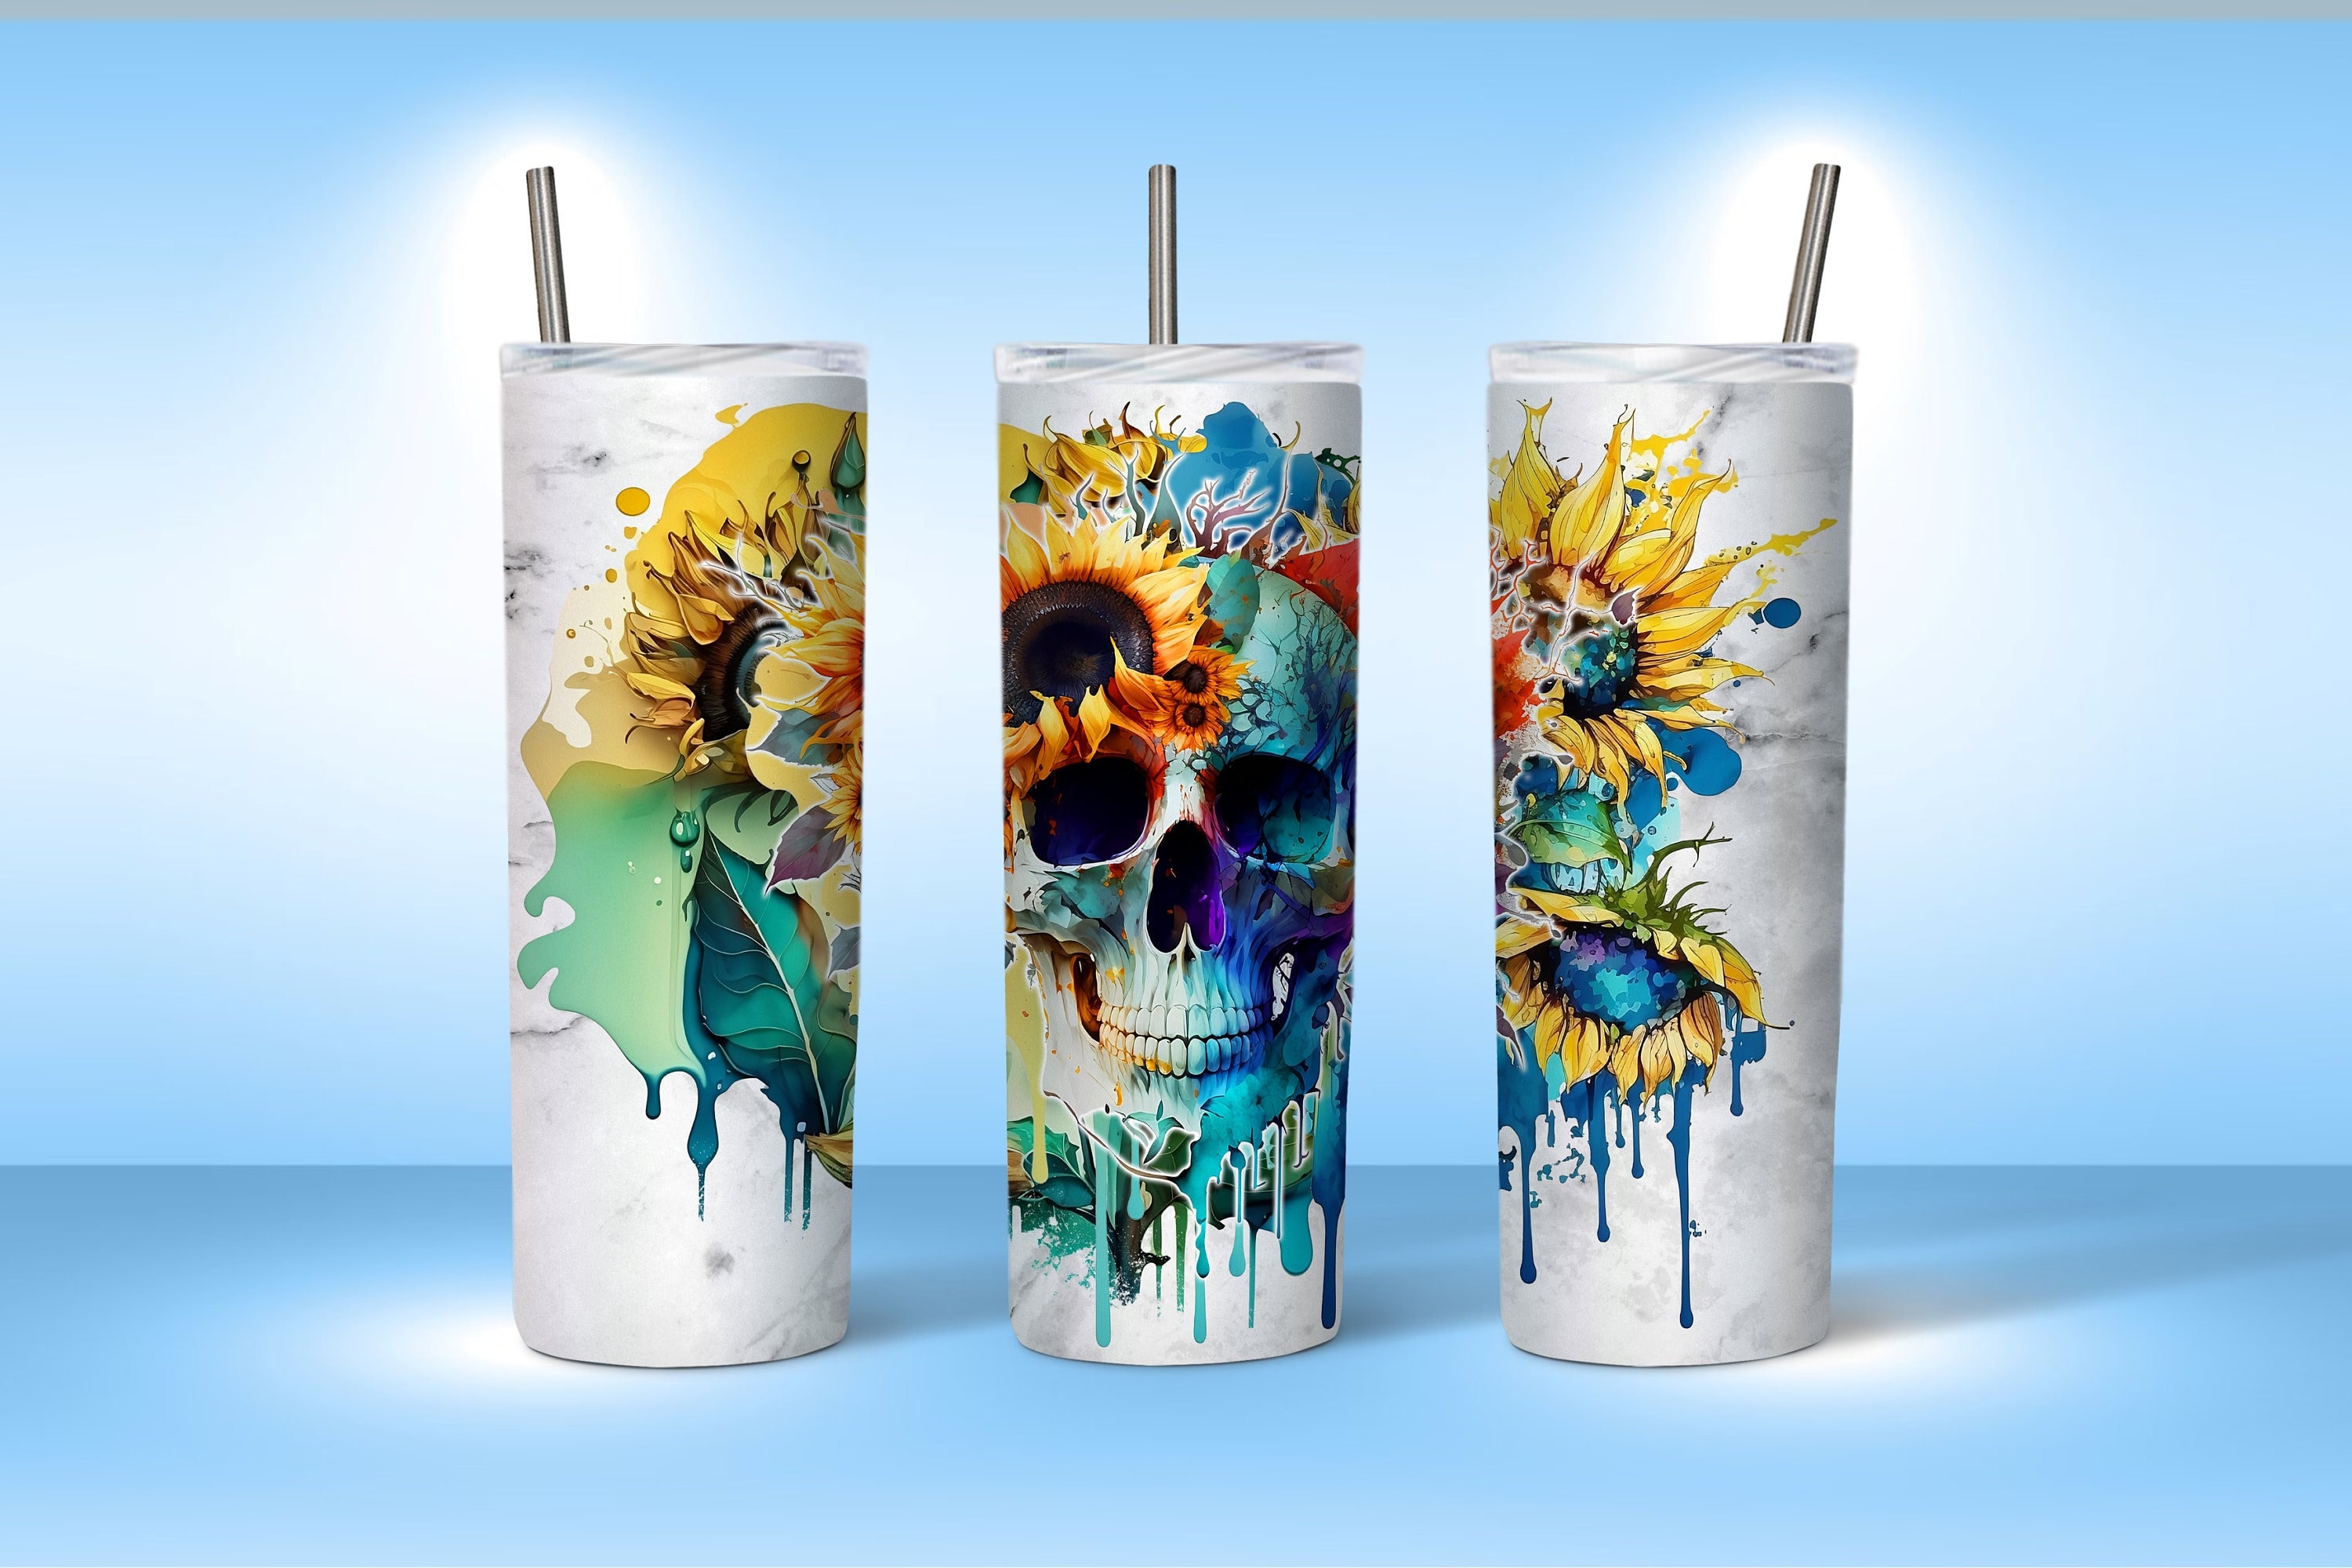 Skull and Teal Flower Print Tumbler – Personalized Gift Ideas